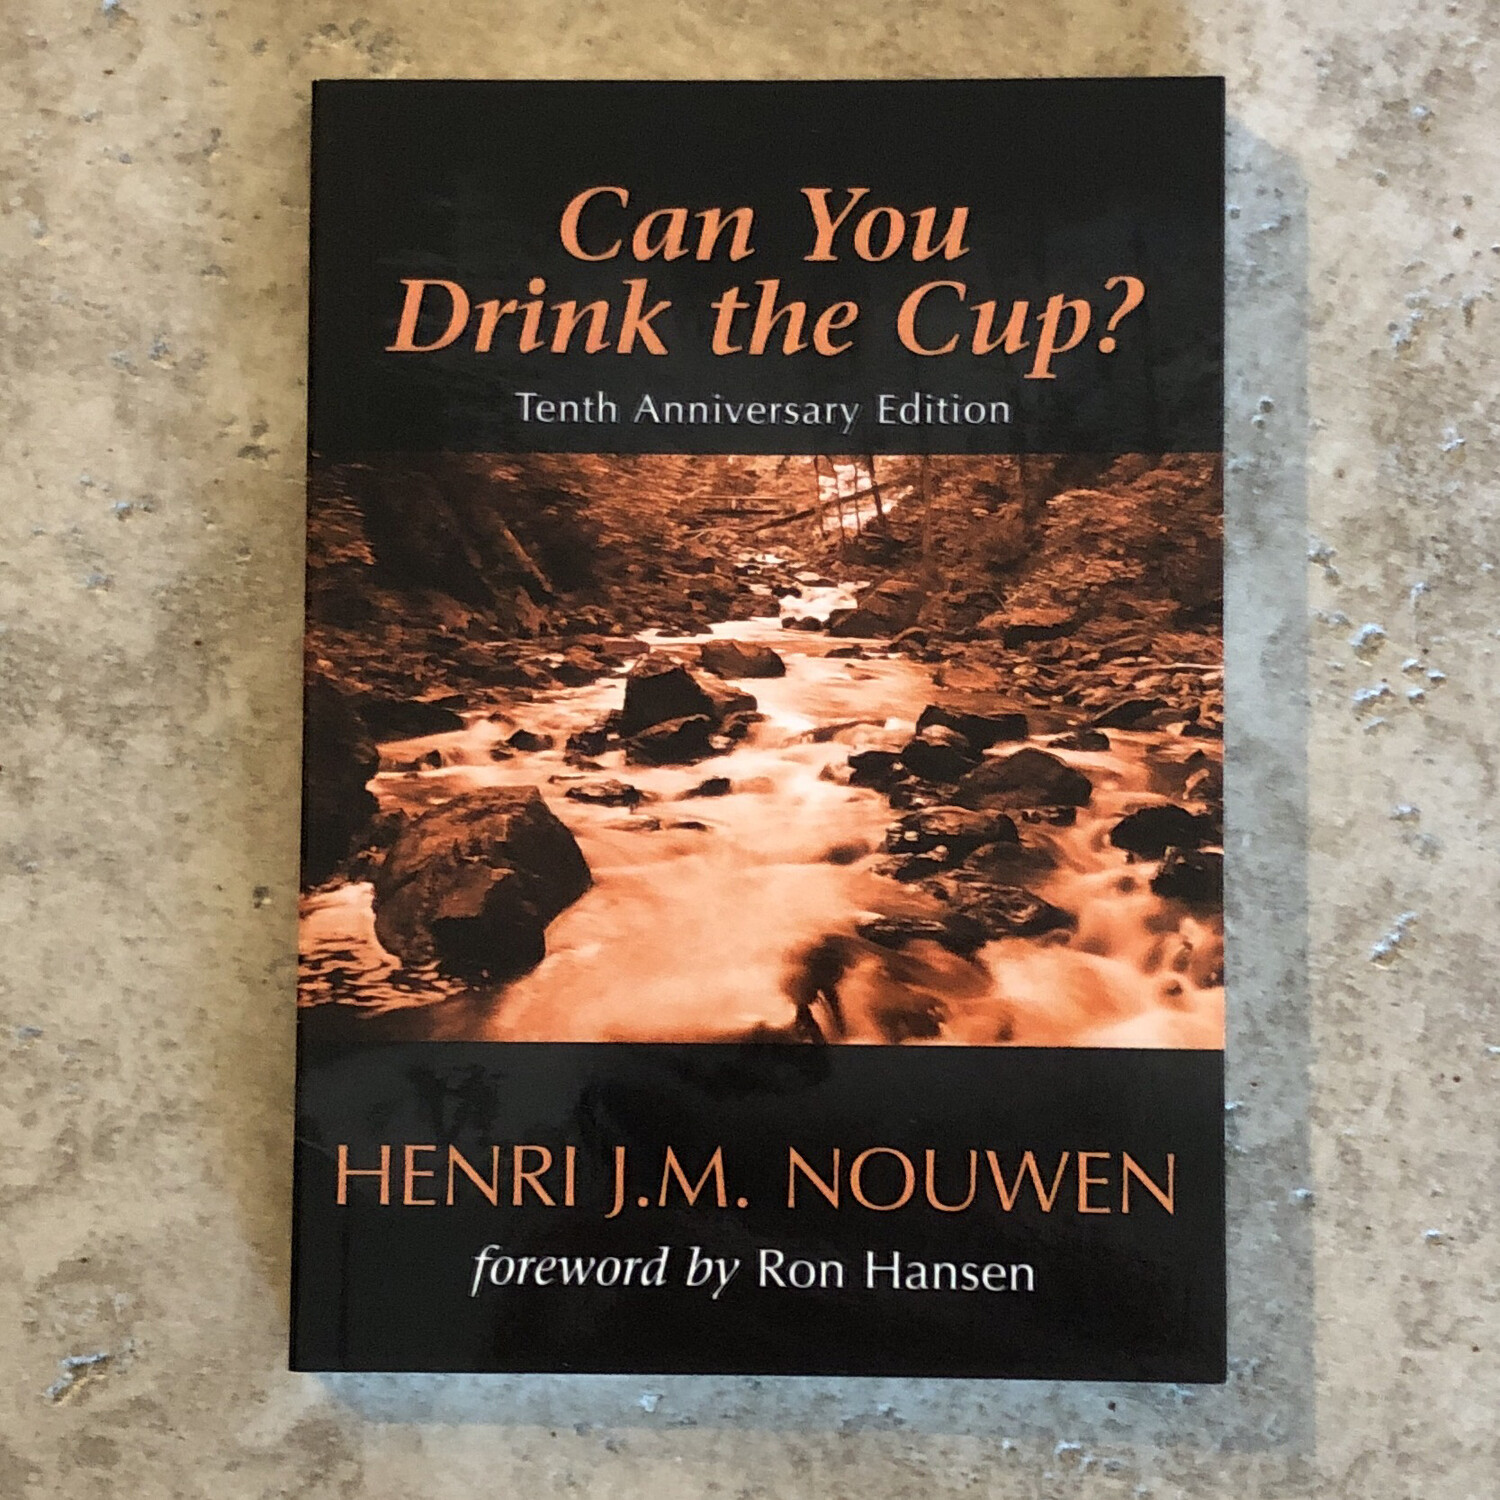 Can you drink the cup? by Henri J M Nouwen